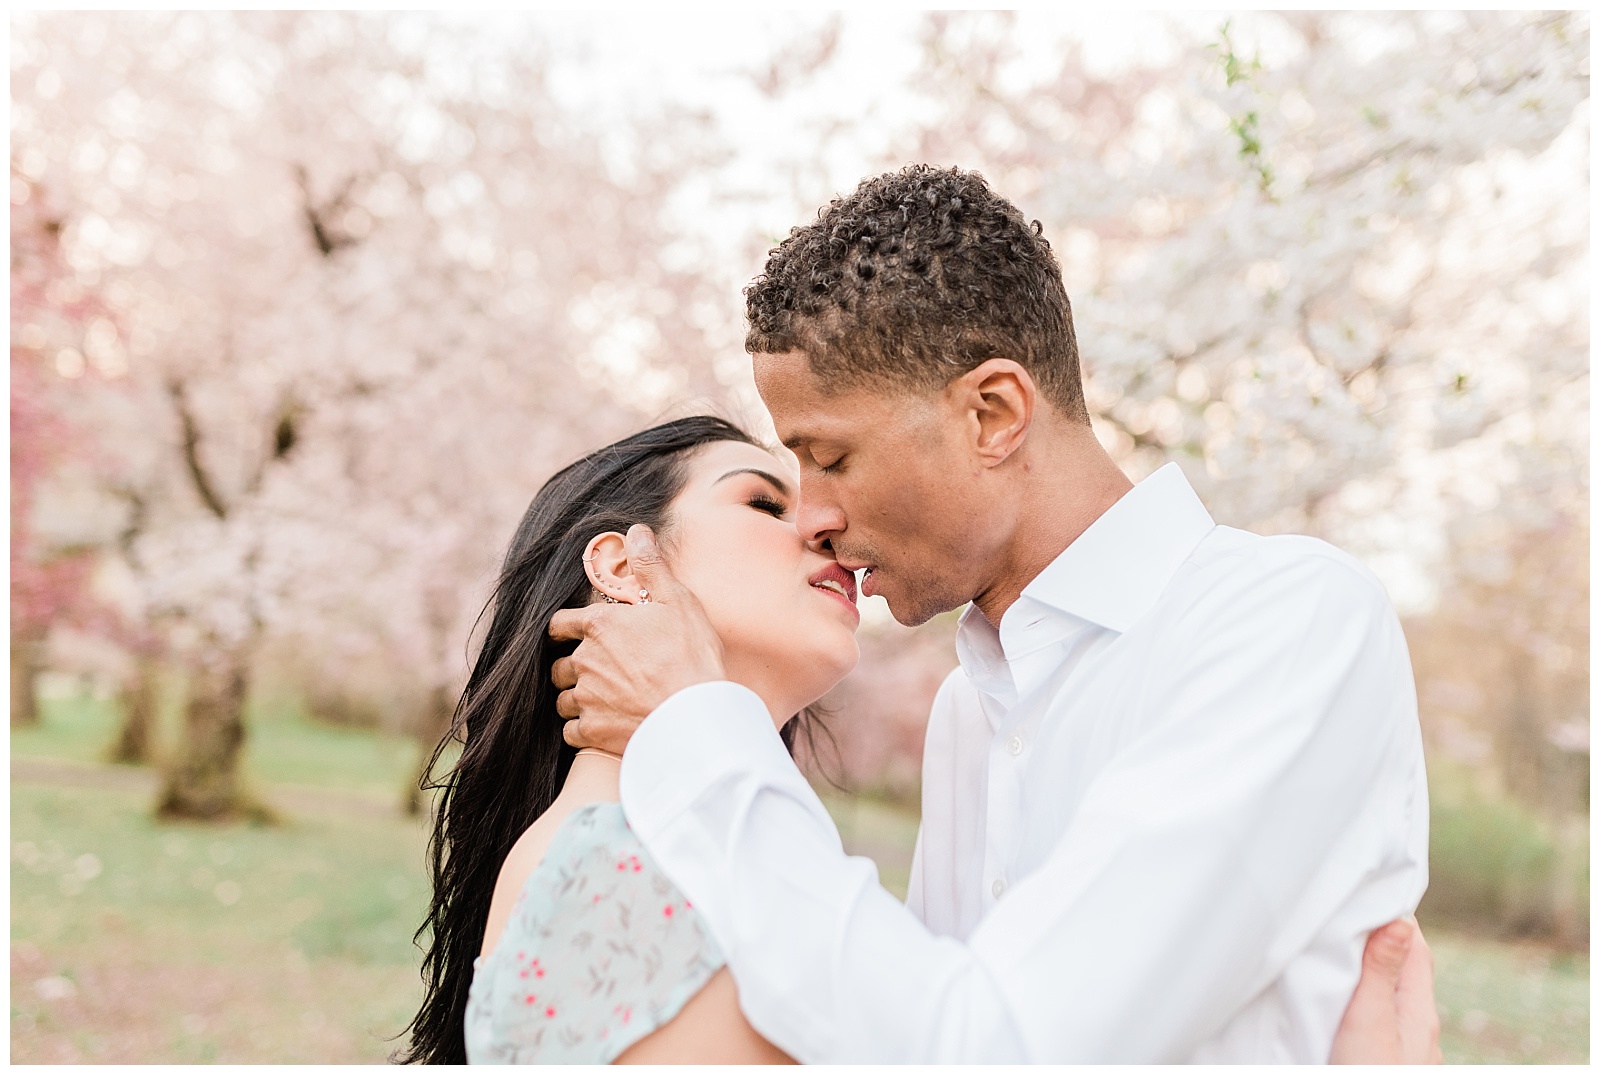 A man pulls his fiance in for a kiss under the cherry blossom trees.